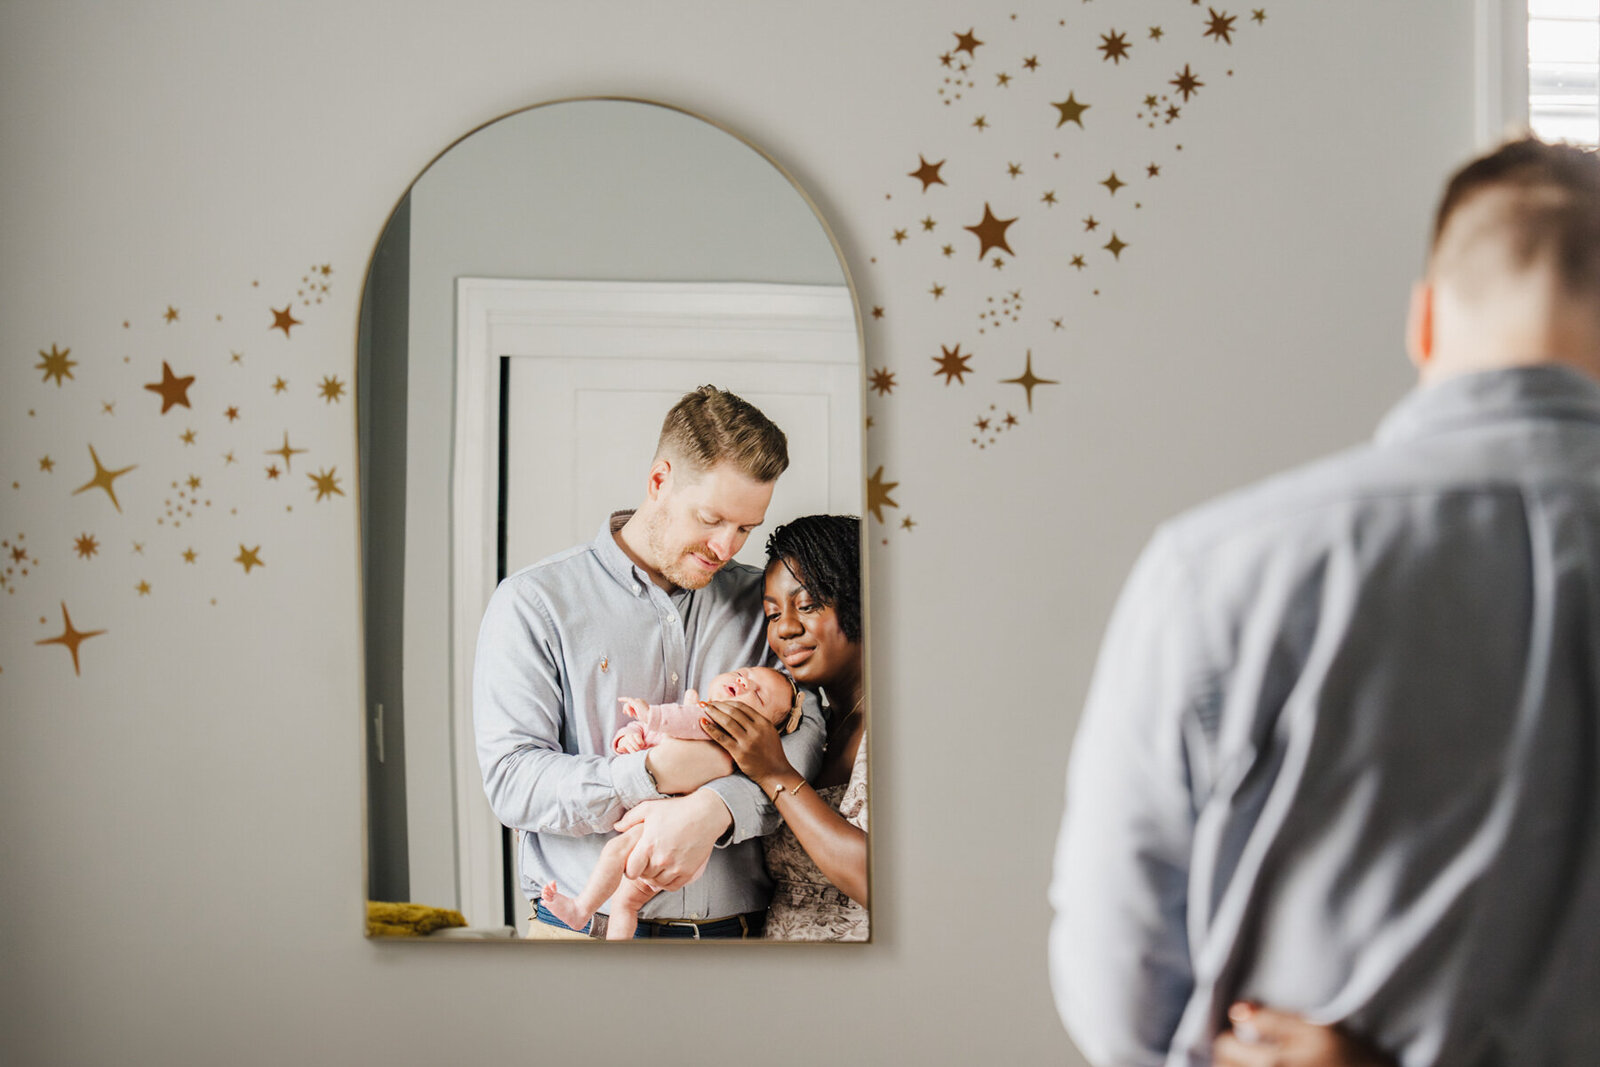 a mirror shows the reflection of parents gazing down at their newborn baby in nursery